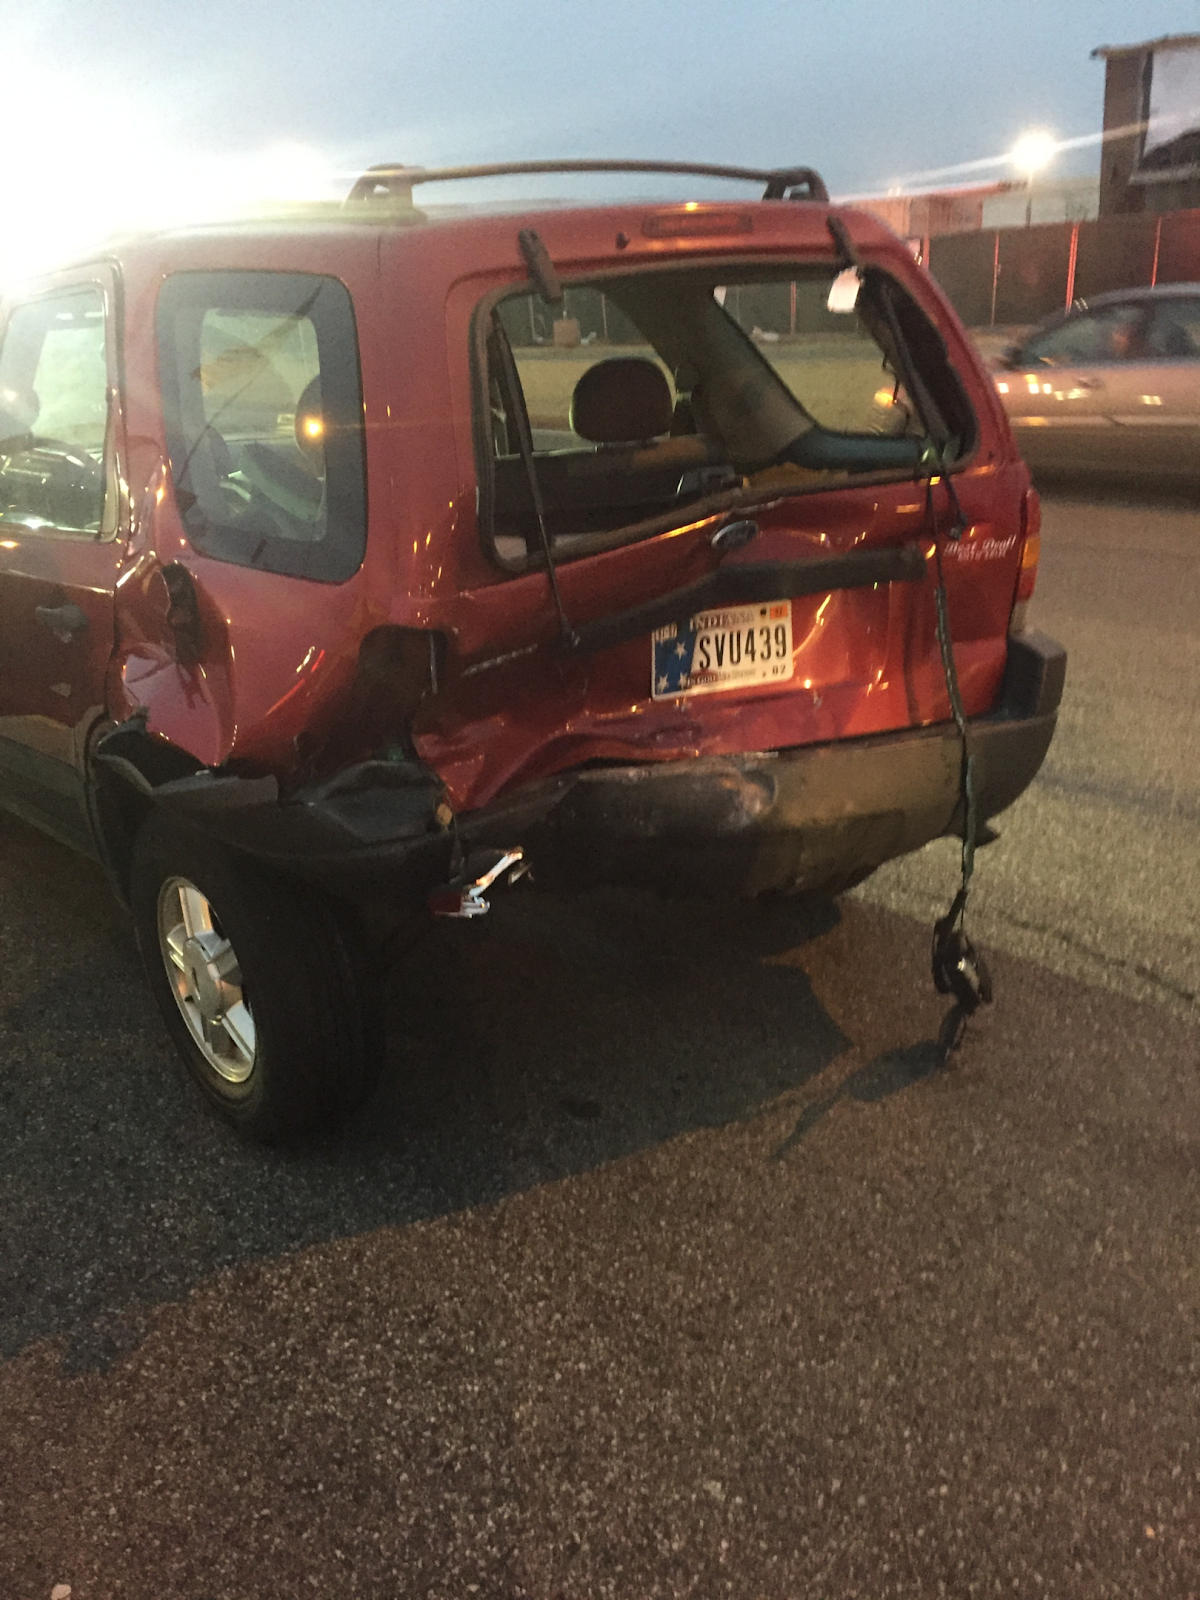 rear end collision damage in indiana, red car damaged in the back